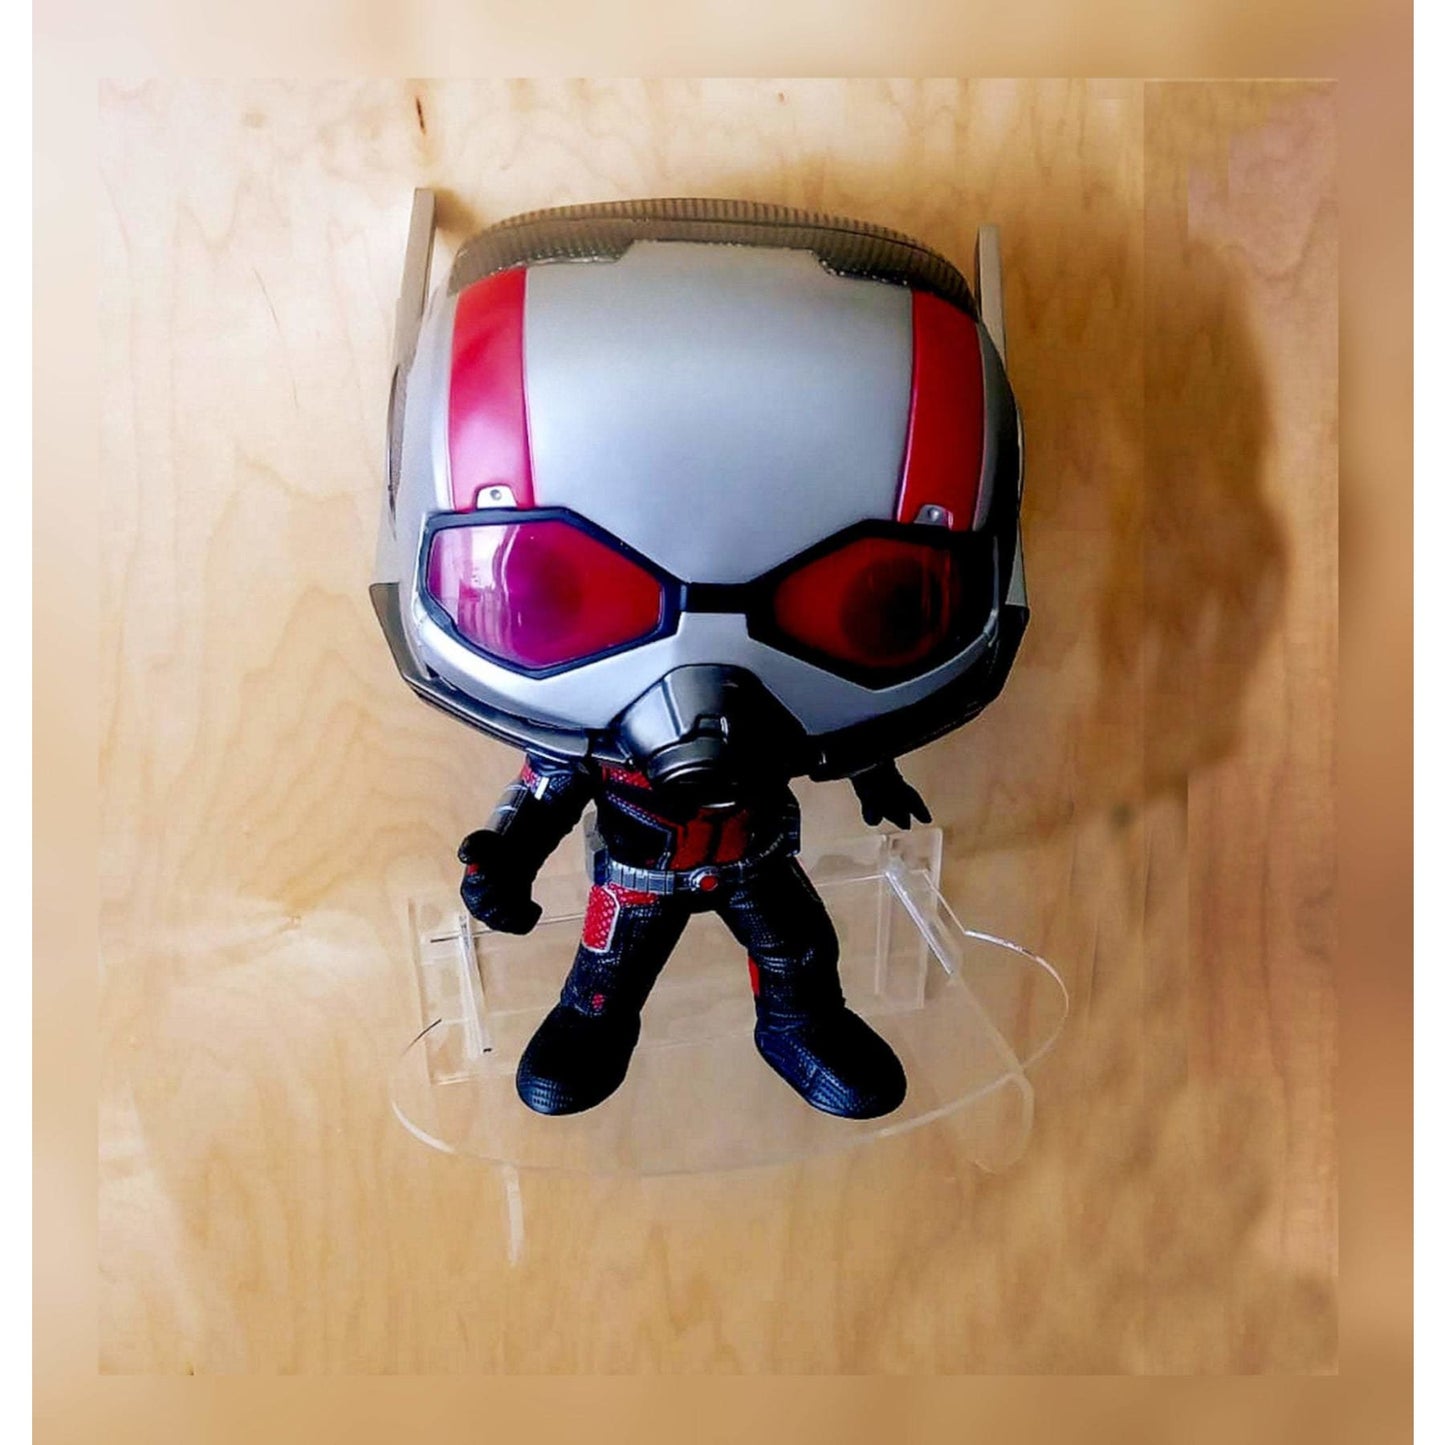 For 10" Funko Pop Vinyl: Clear Acrylic Wall Stand, Stick On, Single Shelf No Nails or Screws